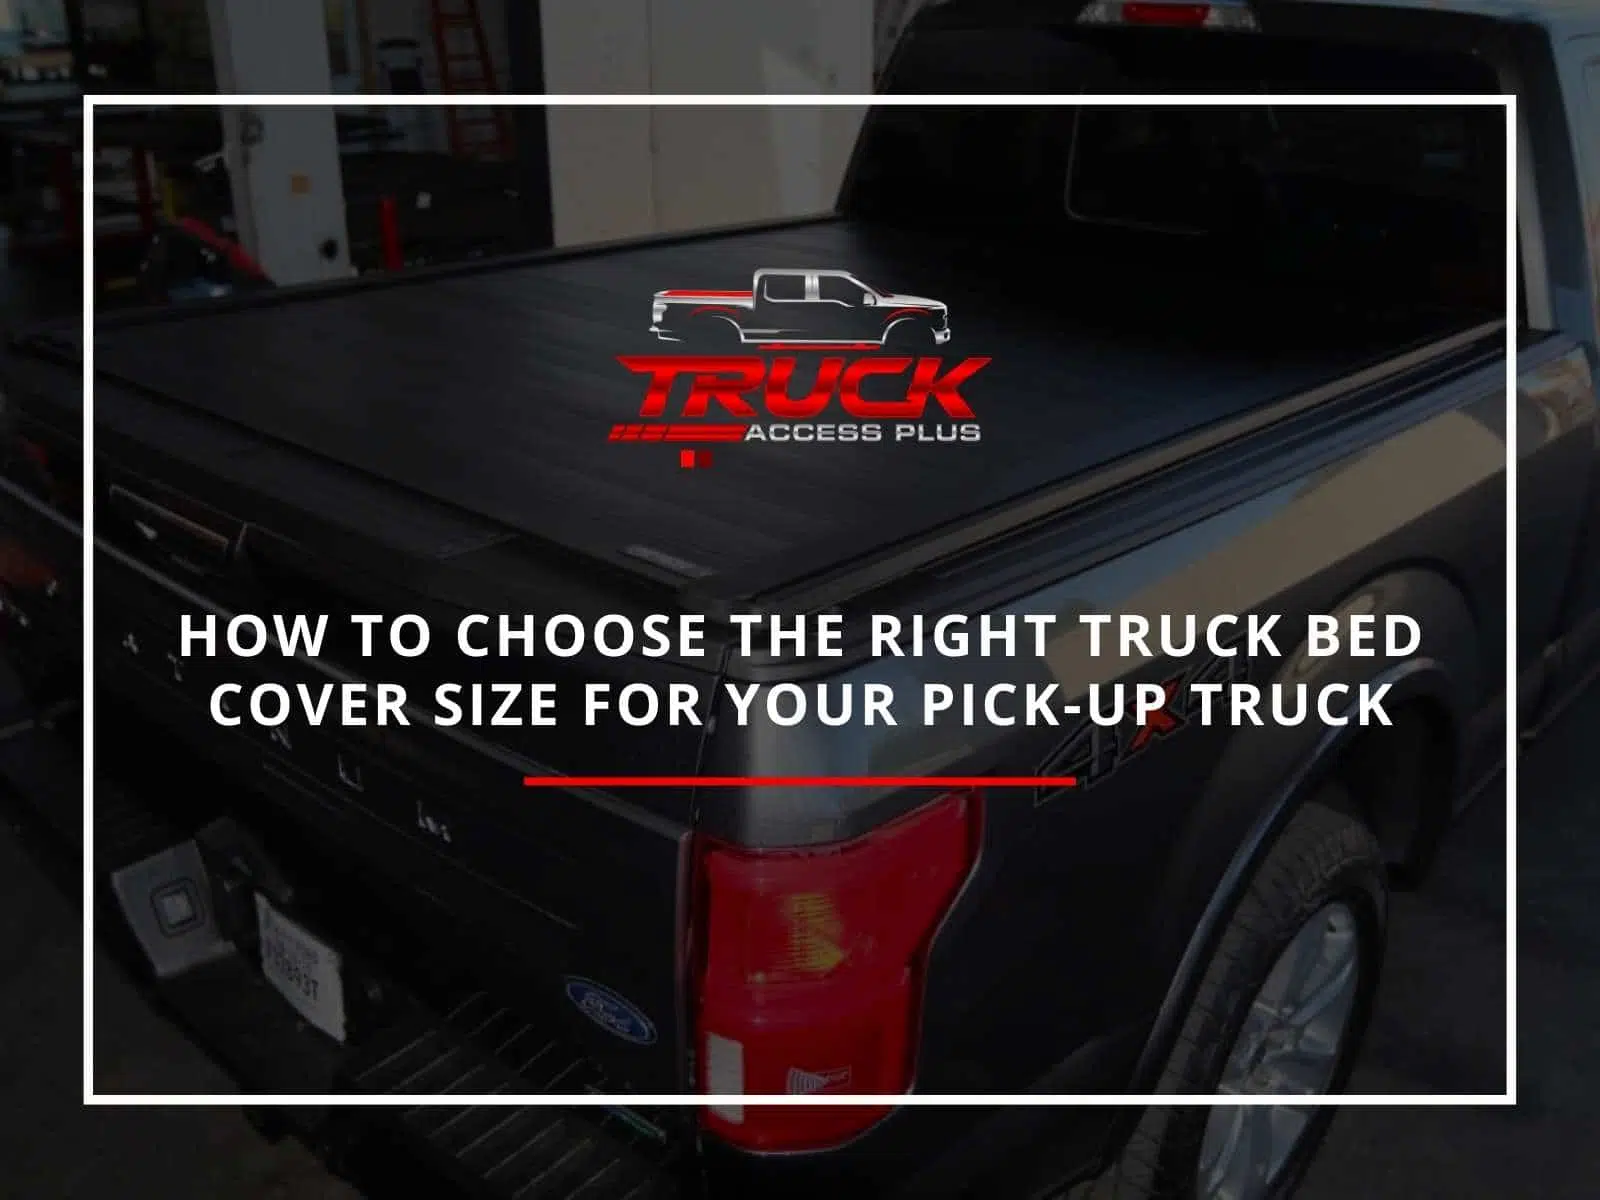 Buying a truck bed cover in Arizona